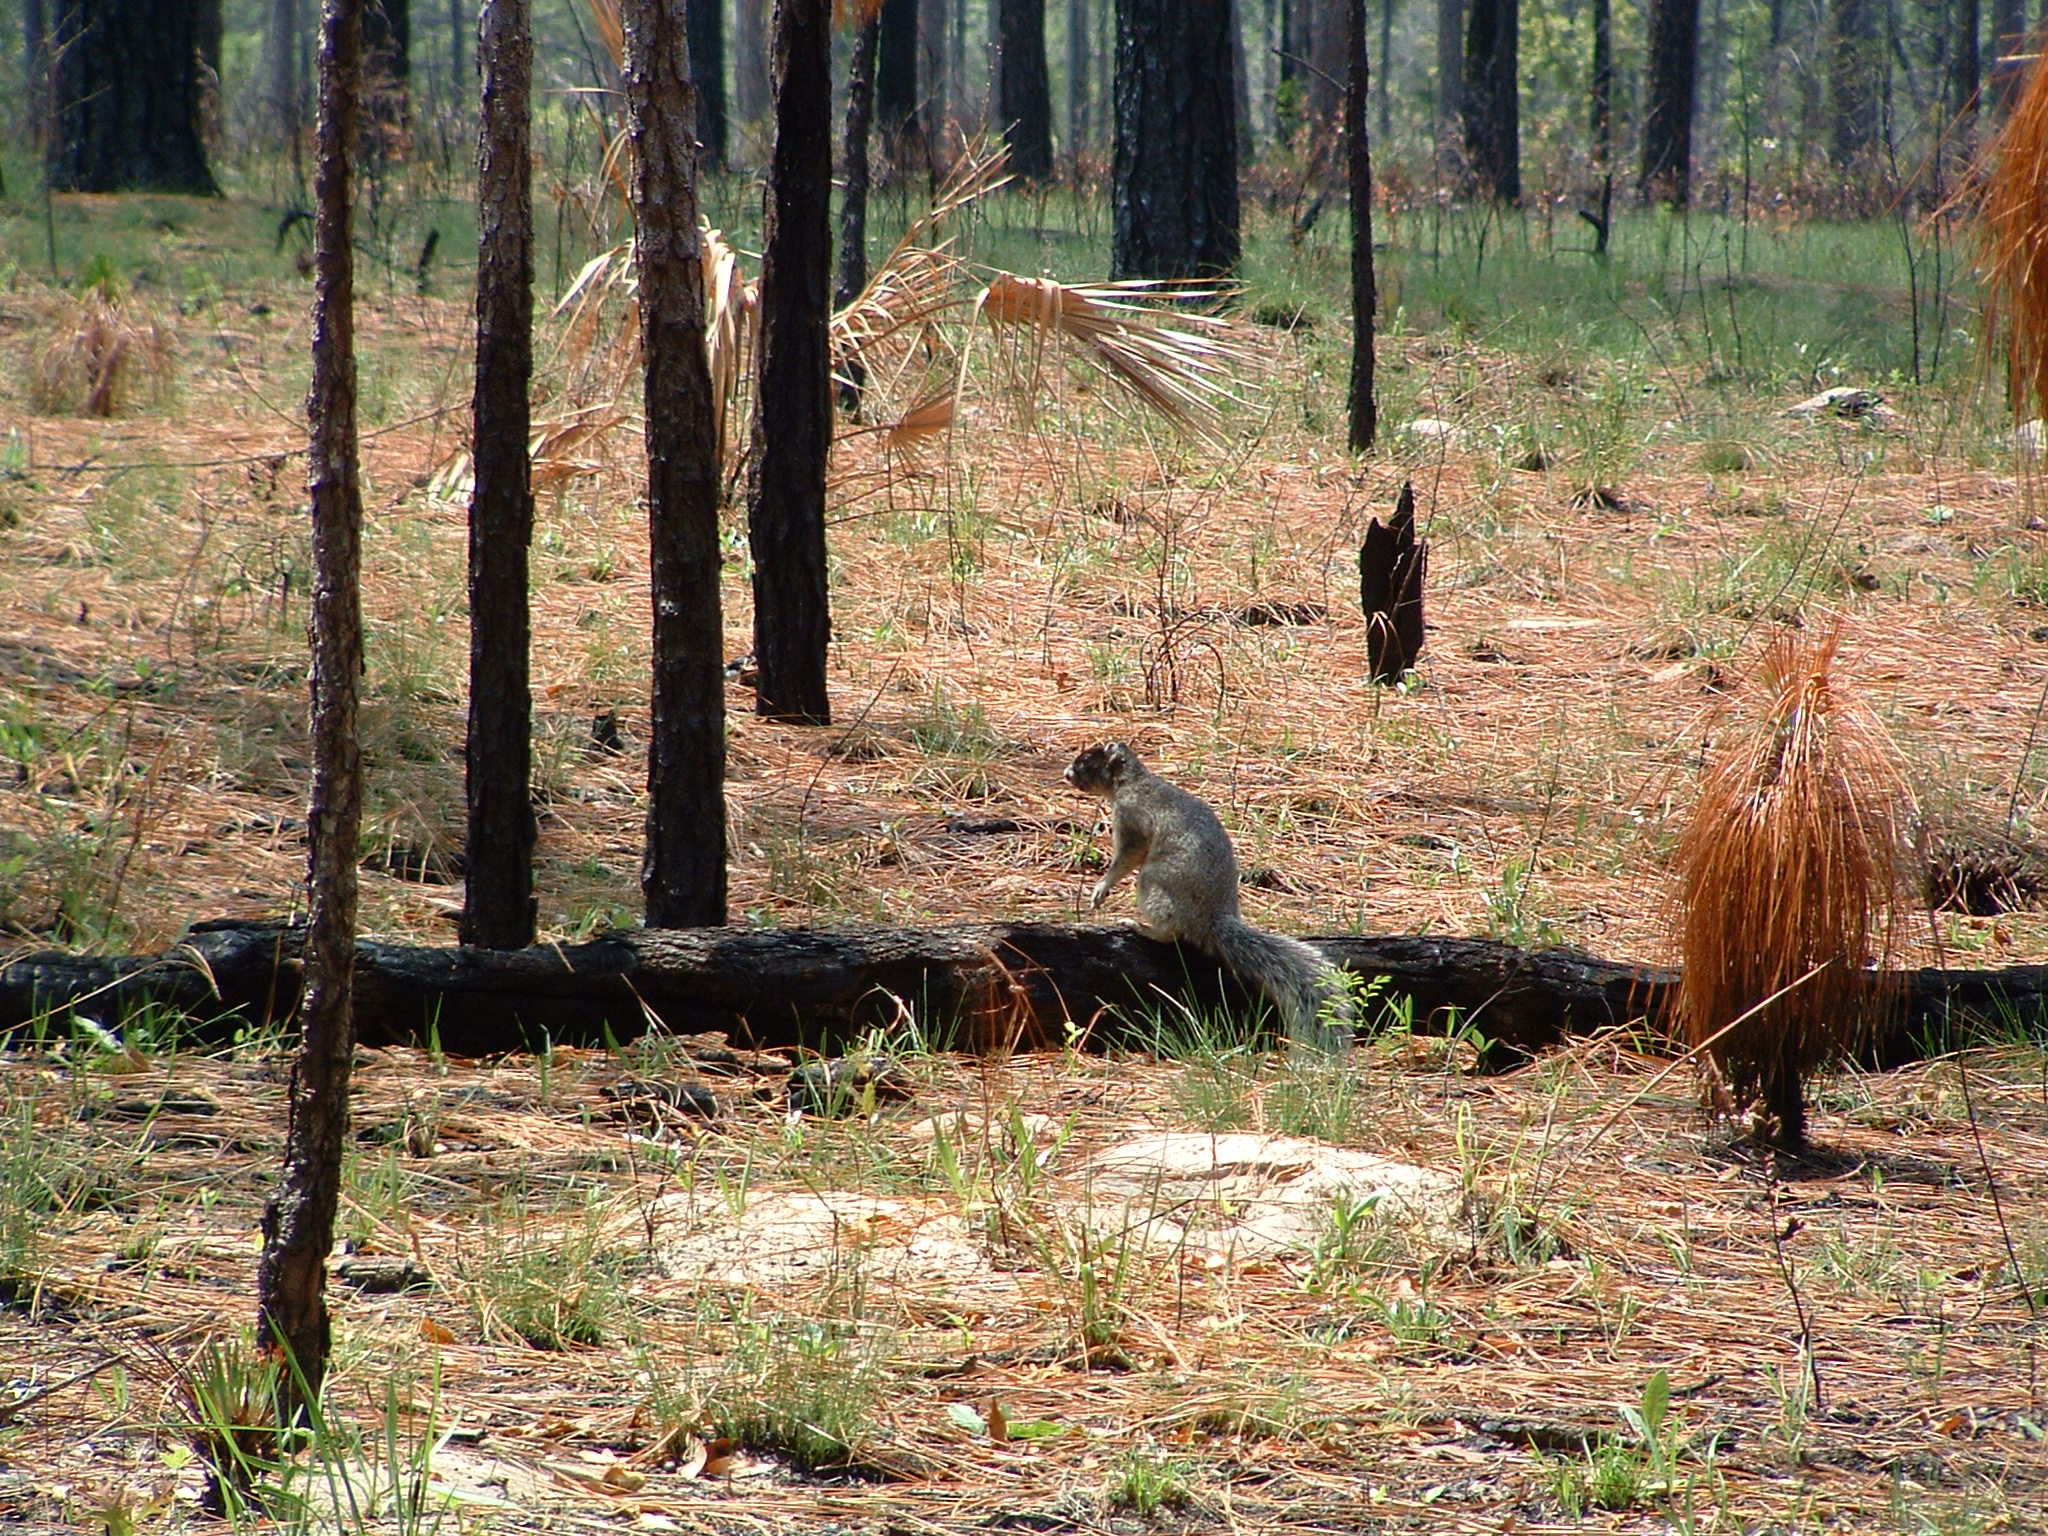 A view of a Sherman's fox squirrell